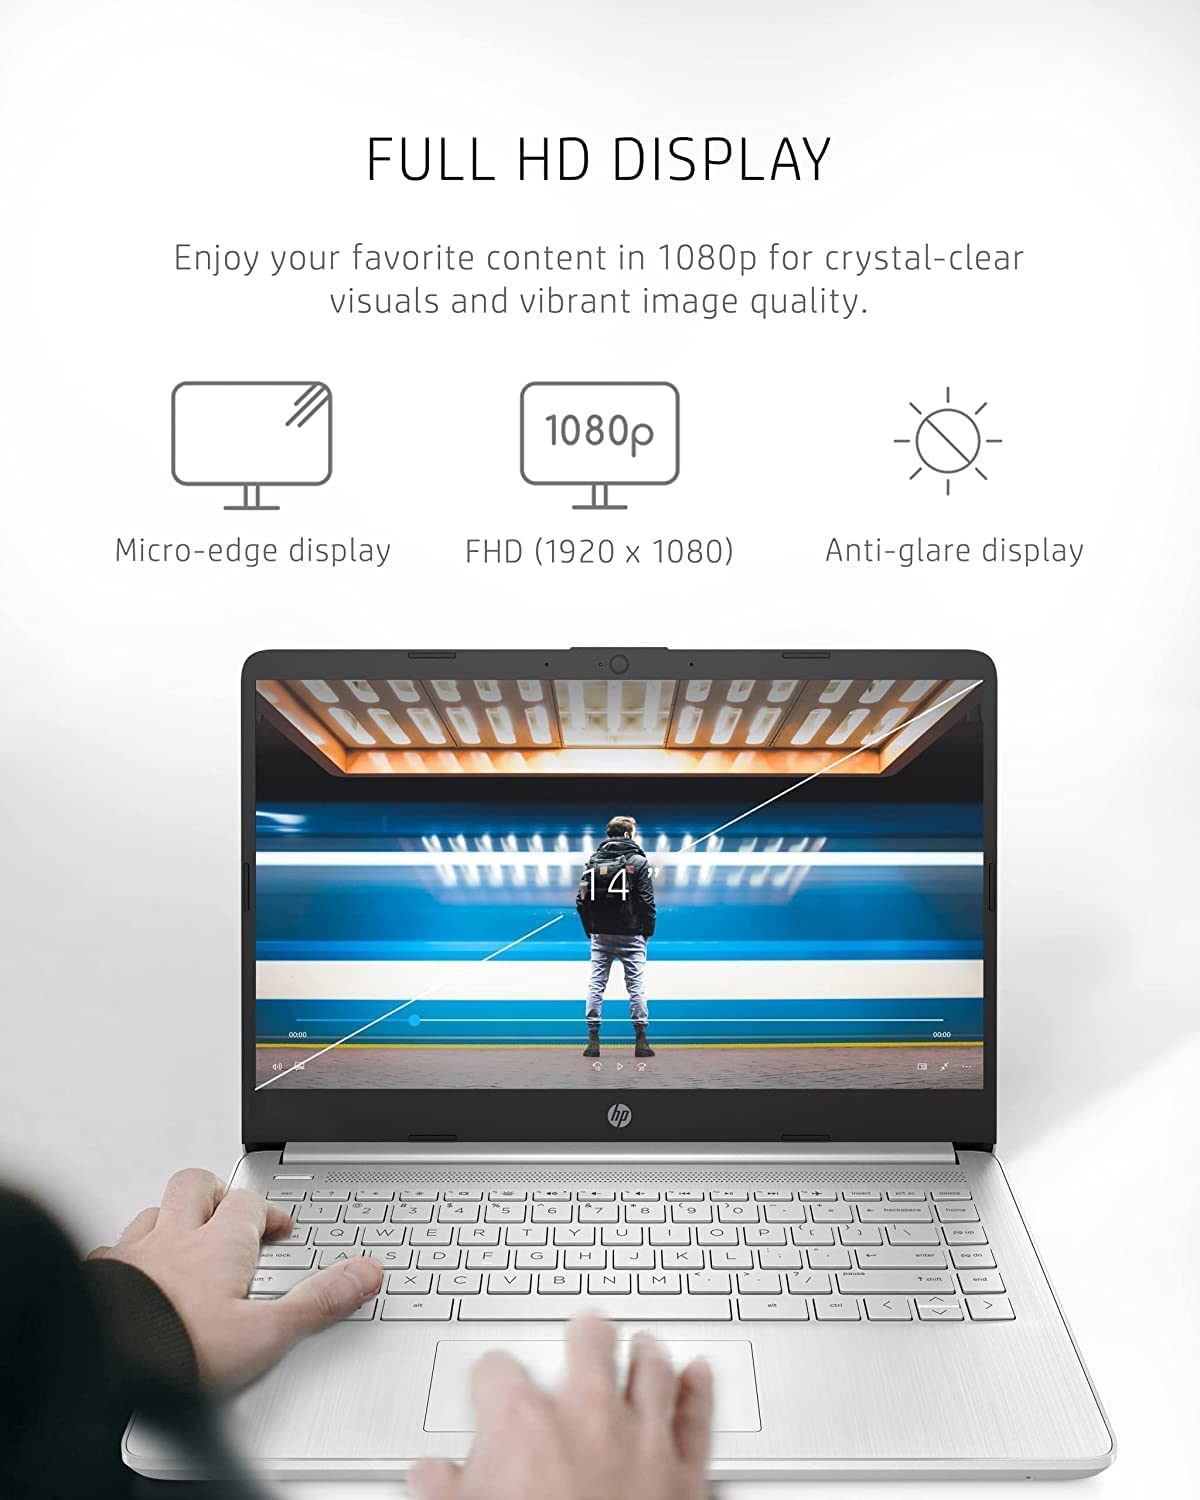 HP Elite Dragonfly Multi-Touch 2-in-1 Laptop - 13.3&#34; FHD Touchscreen - 1.6 GHz Intel Core i5-8265U Quad-Core - 256GB SSD - 8GB - Windows 10 pro, Blue Magnesium Body